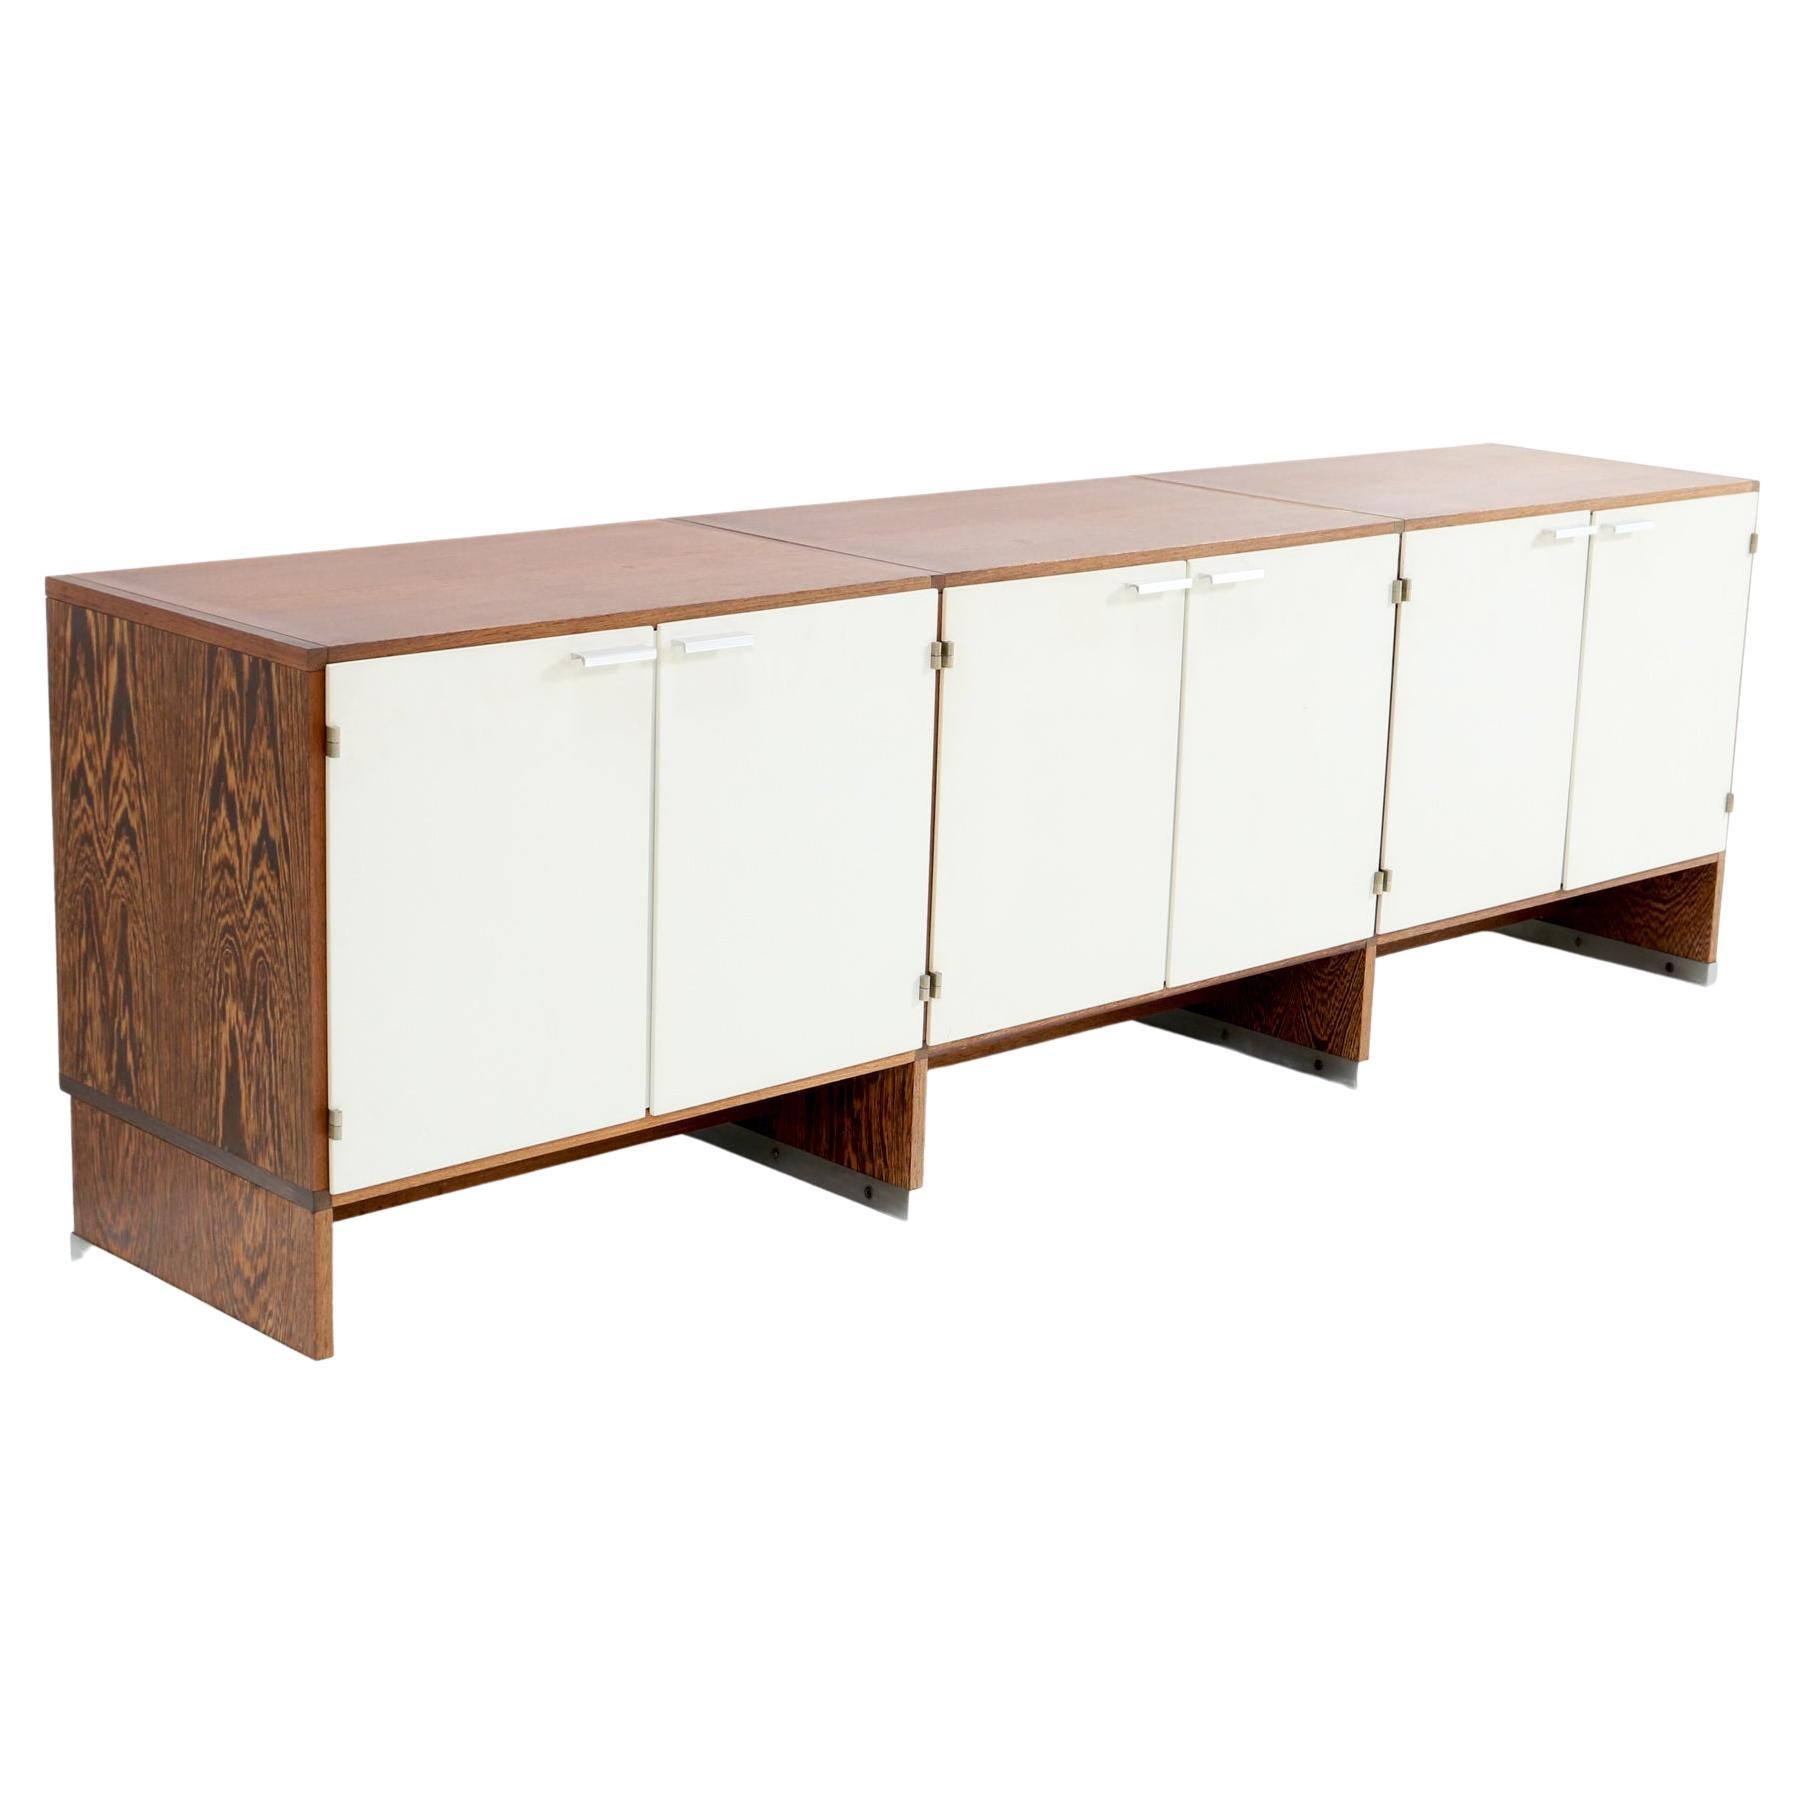 Wengé Mid-Century Modern Credenza or Sideboard by Cees Braakman for Pastoe, 1964